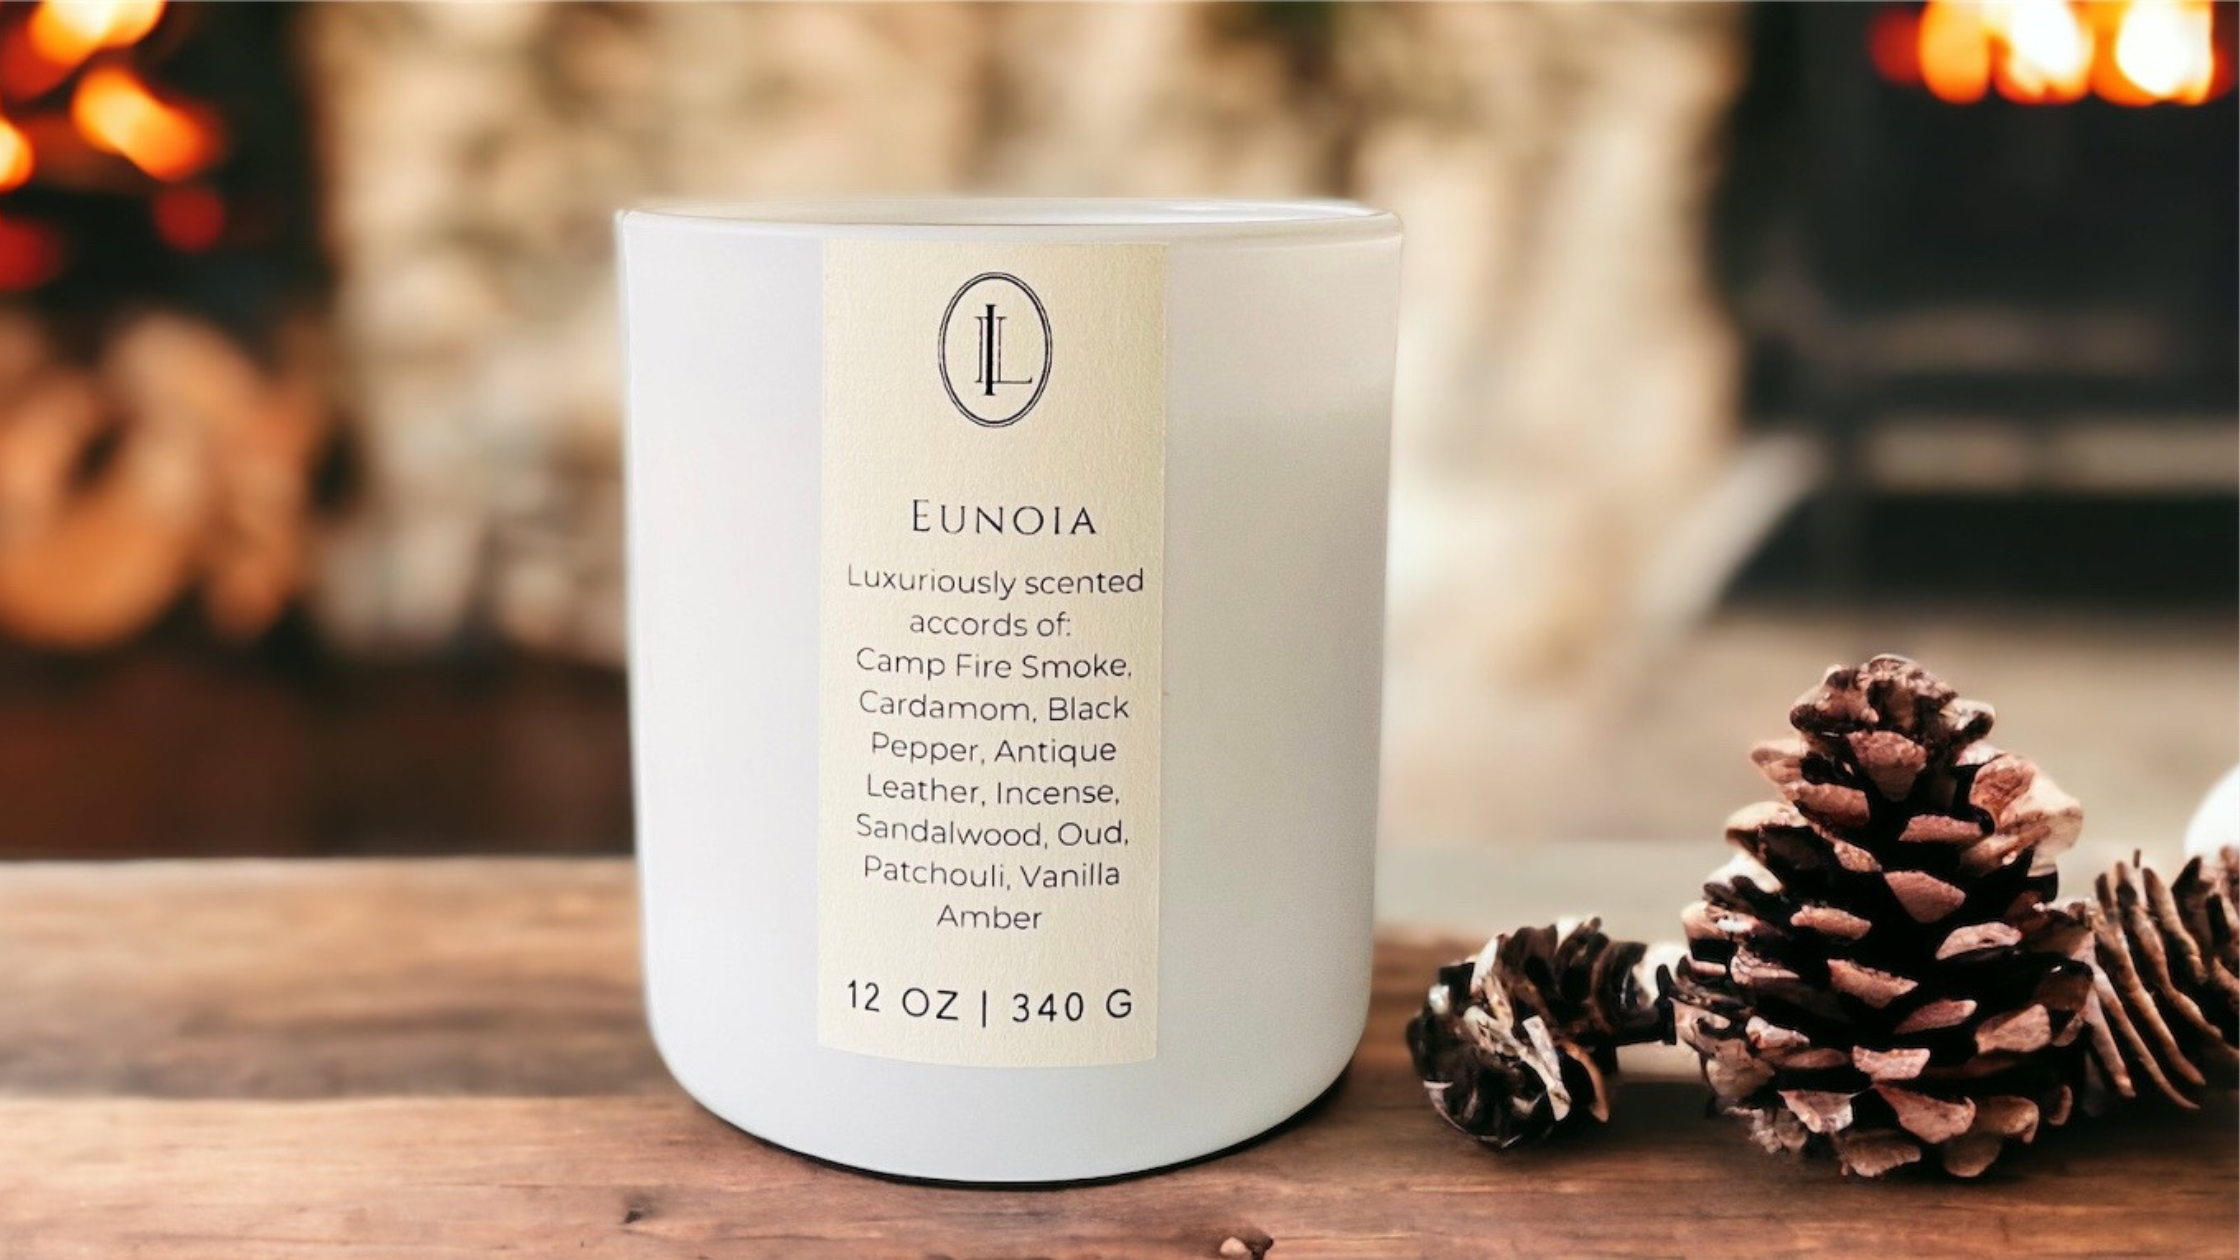 image of Eunoia candle on rustic wood table with pinecones and fireplace in the background